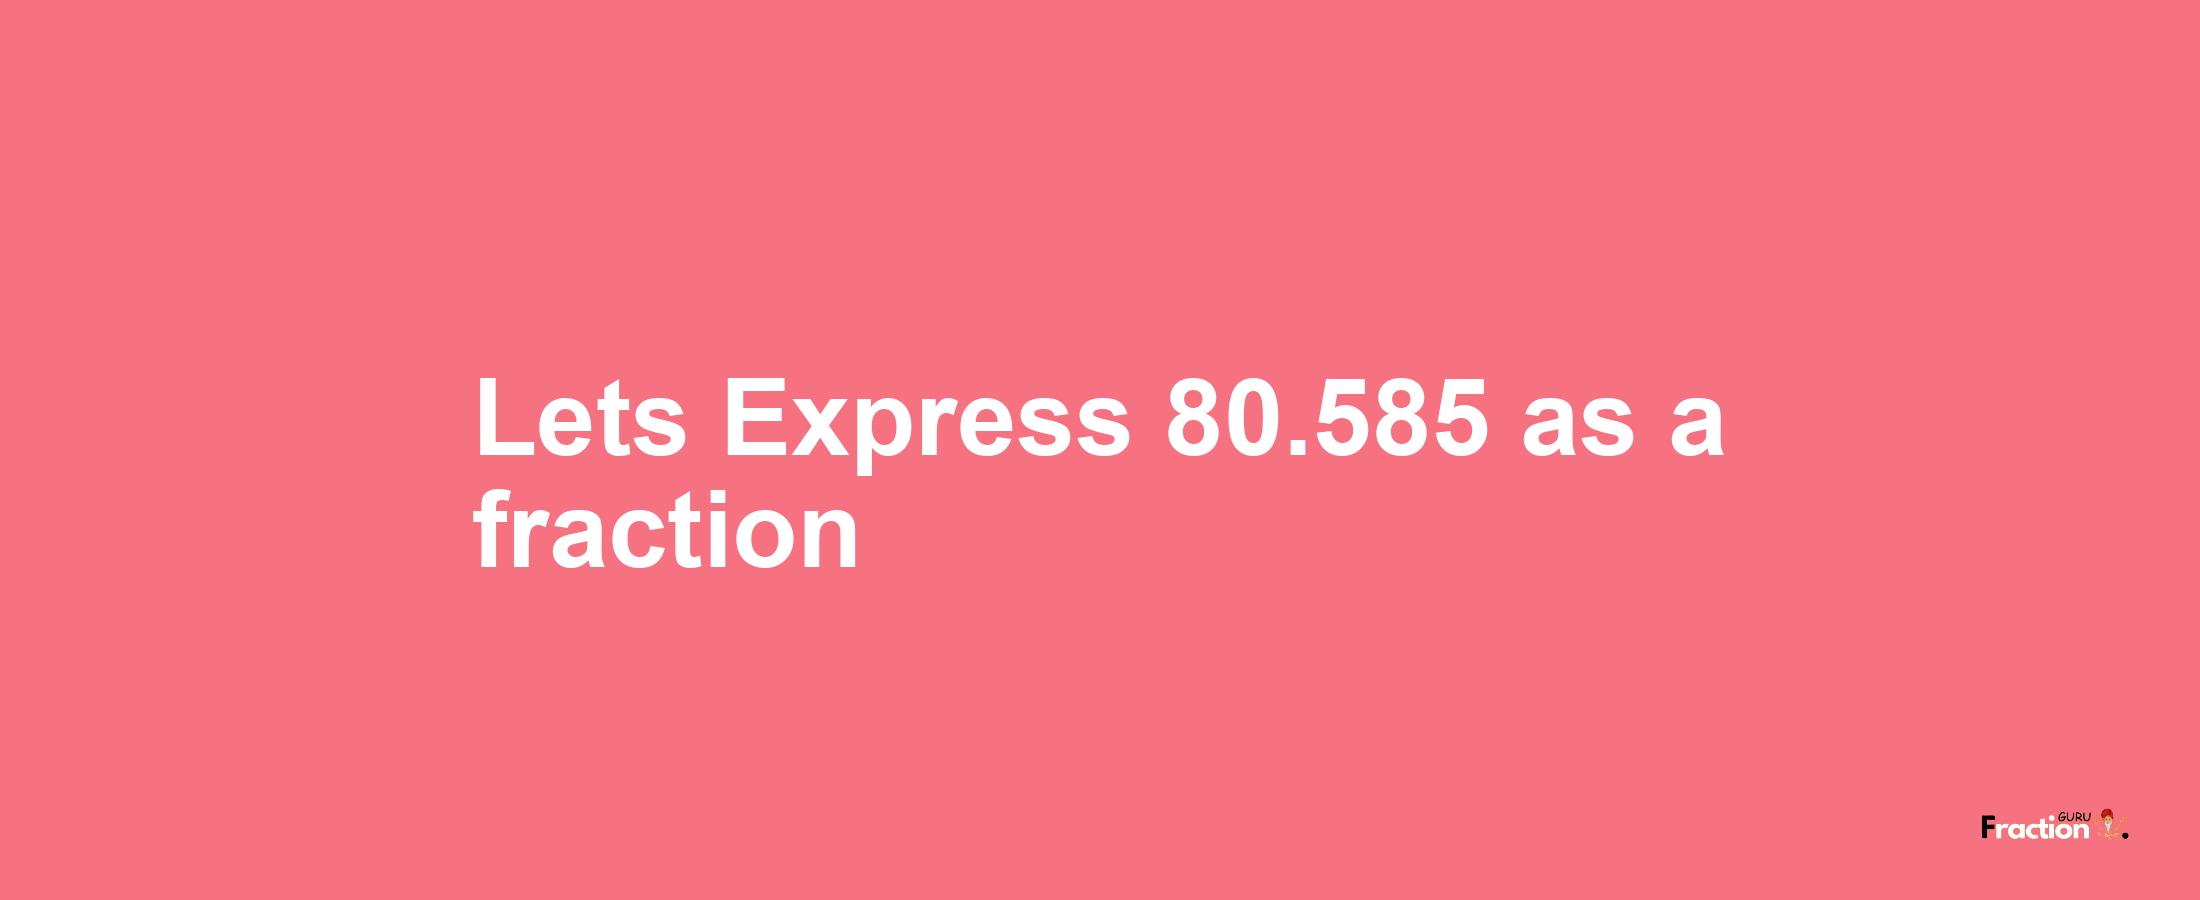 Lets Express 80.585 as afraction